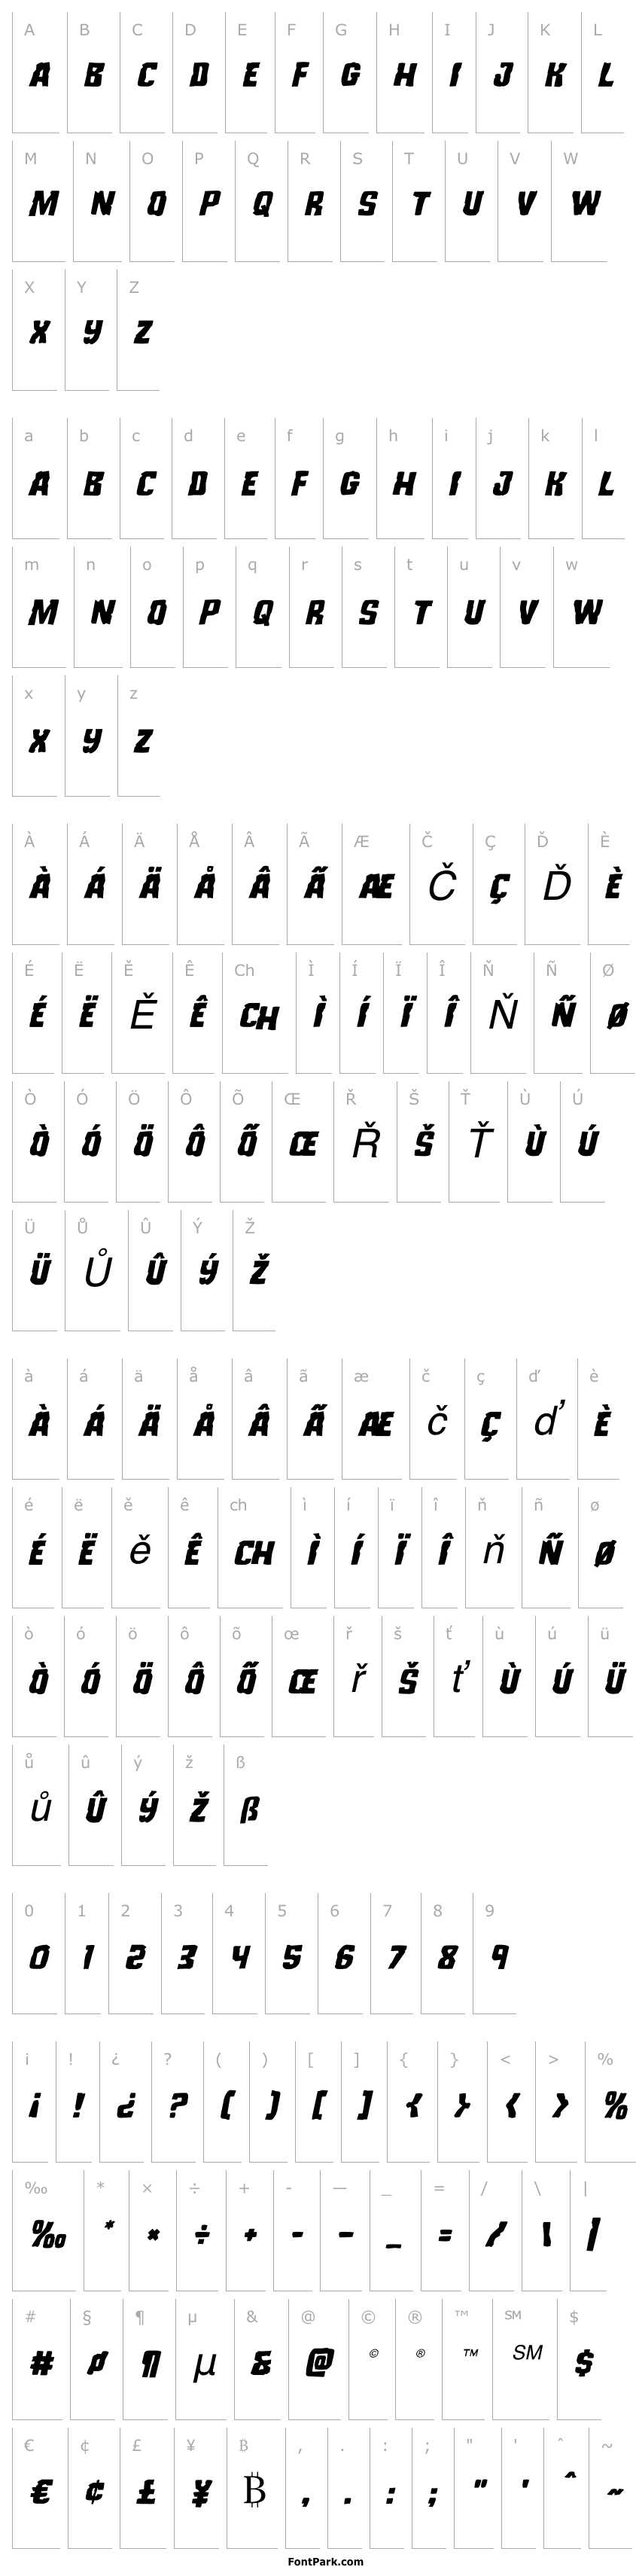 Přehled Monster Hunter Staggered Italic